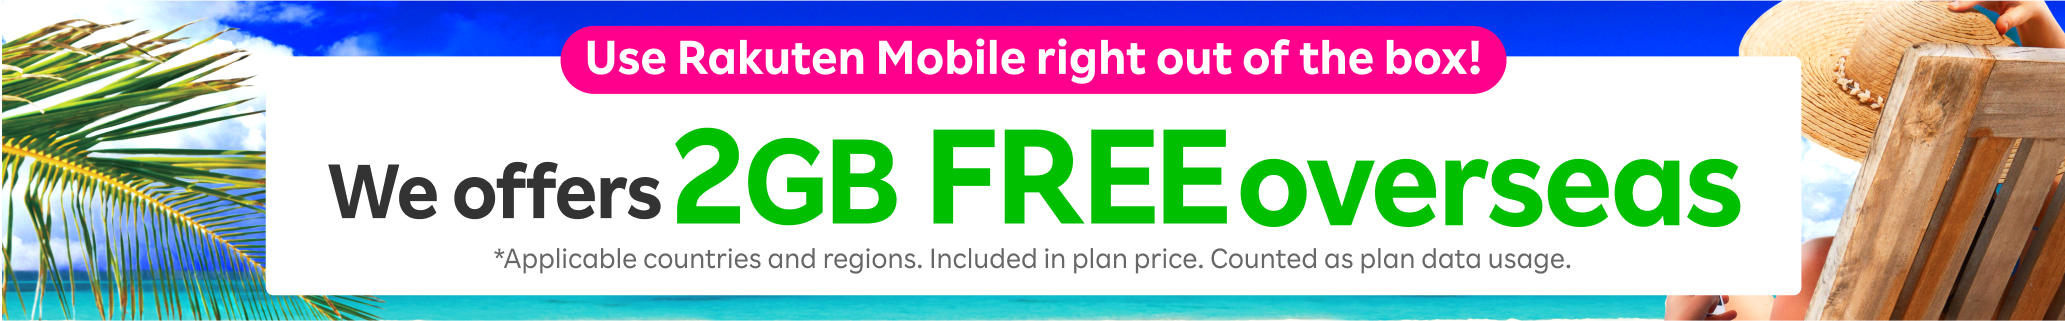 We offer 2GB FREE even overseas! Use Rakuten Mobile right out of the box